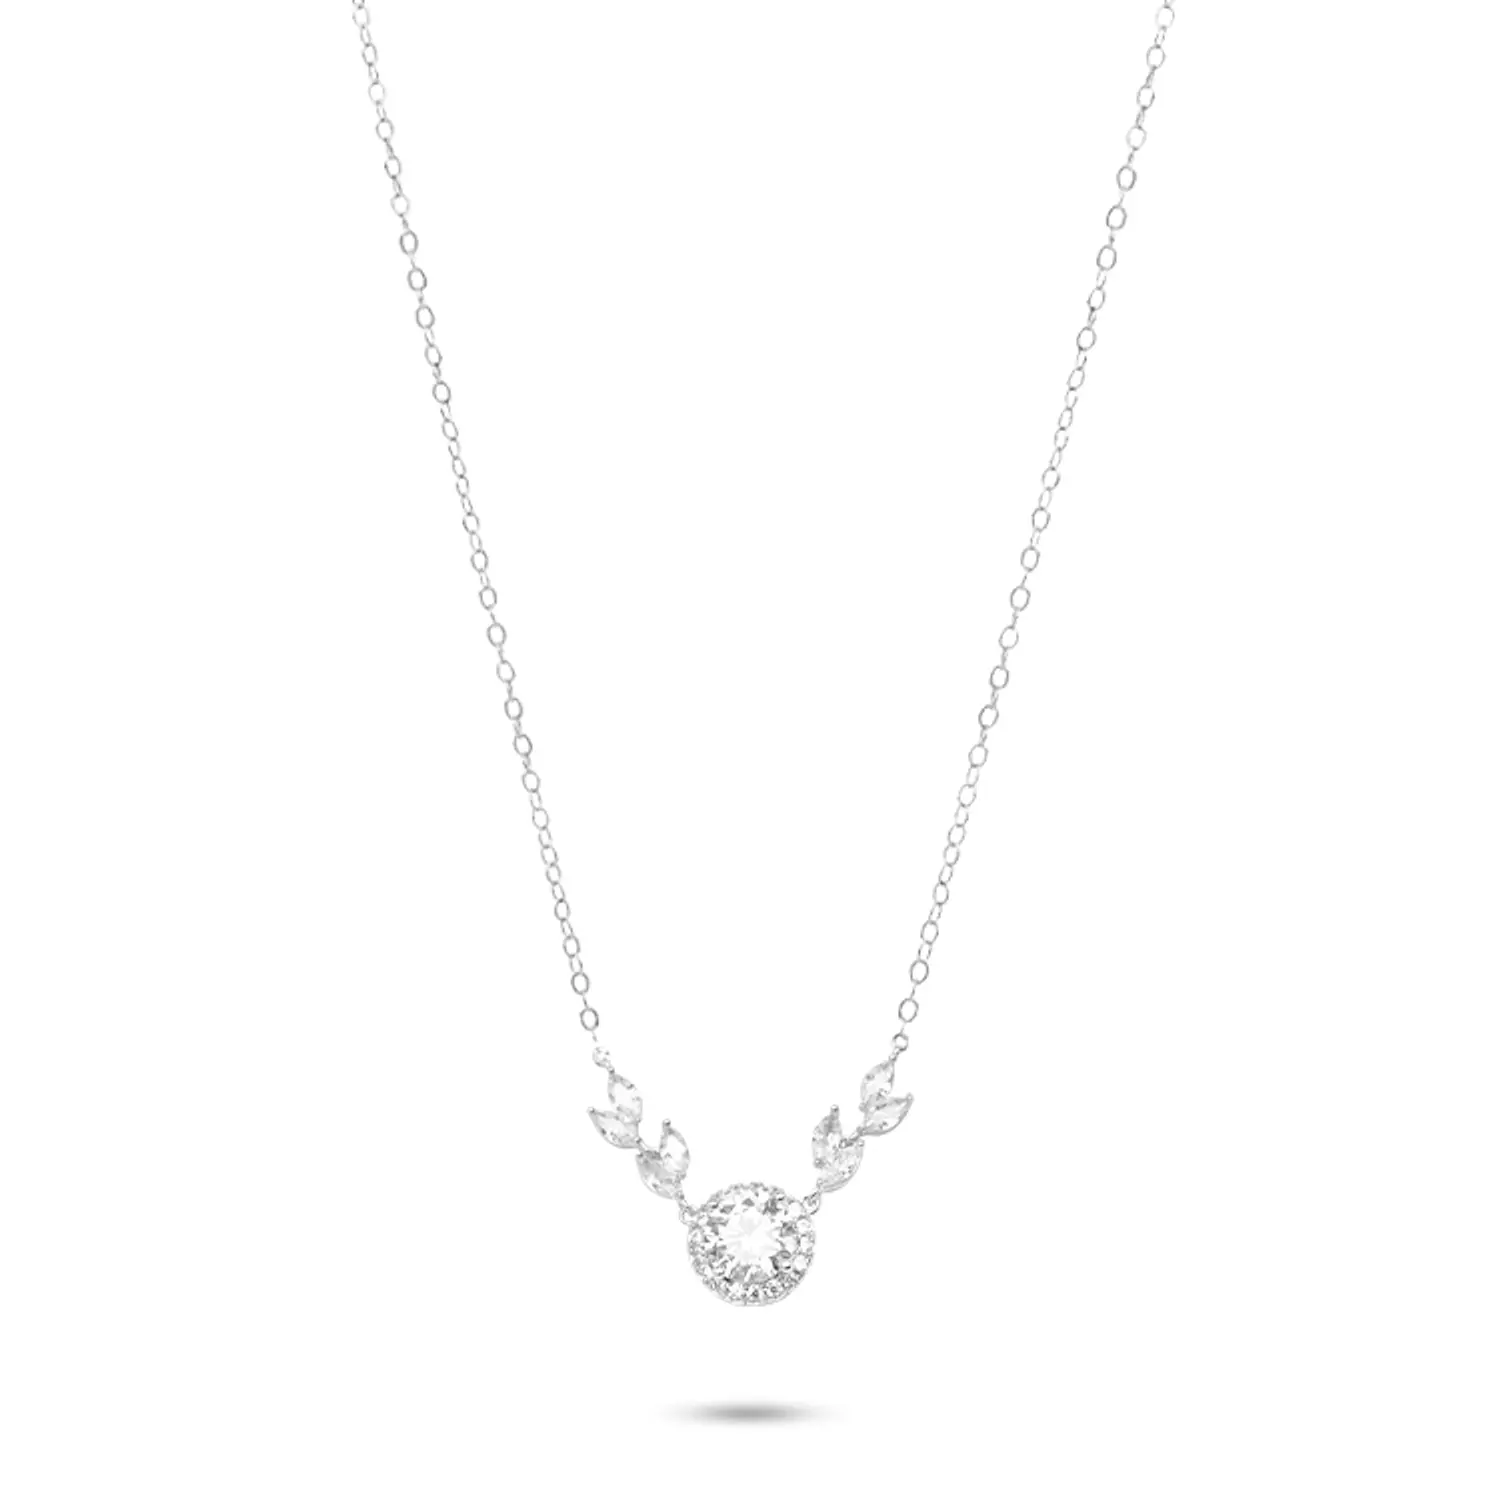  Silver Necklace hover image